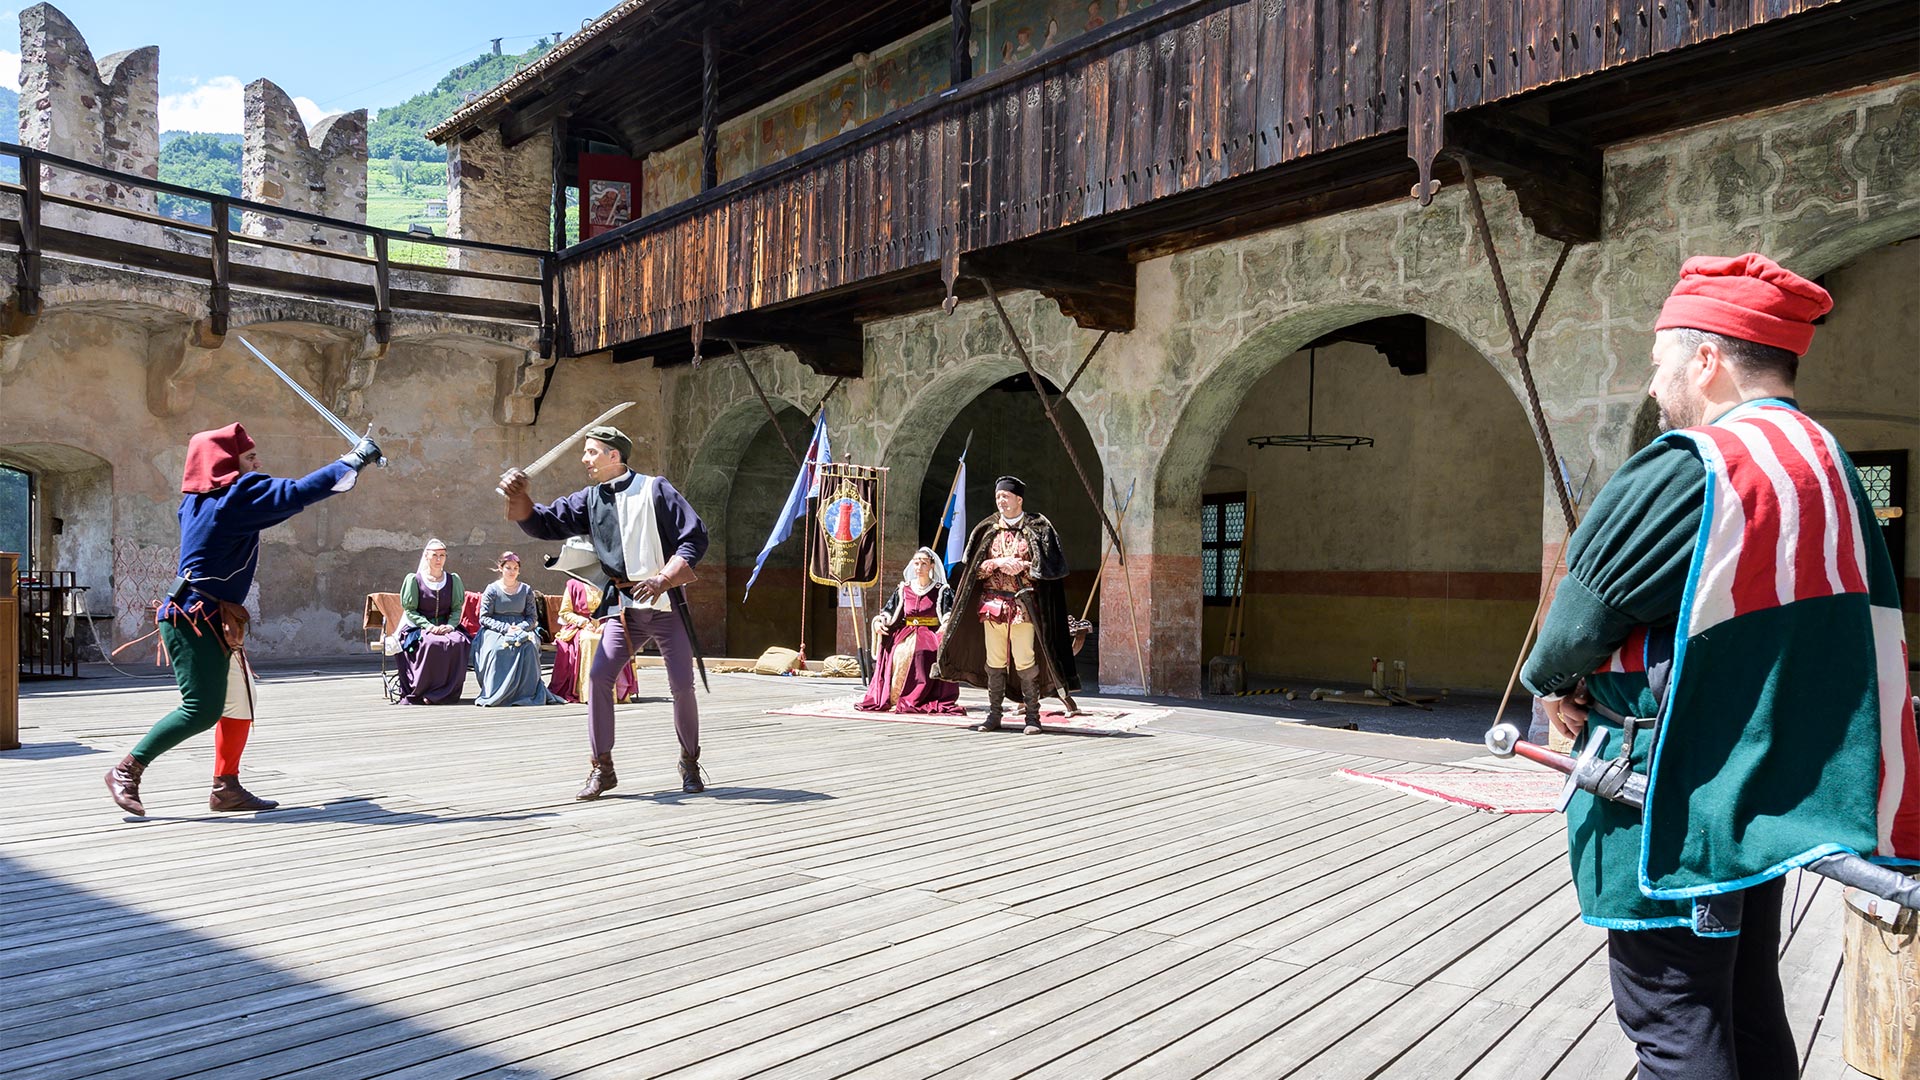 In an open-air cultural event, in which two actors dressed in traditional costumes perform a duel, visitors can learn more about Bolzano's history and culture. 